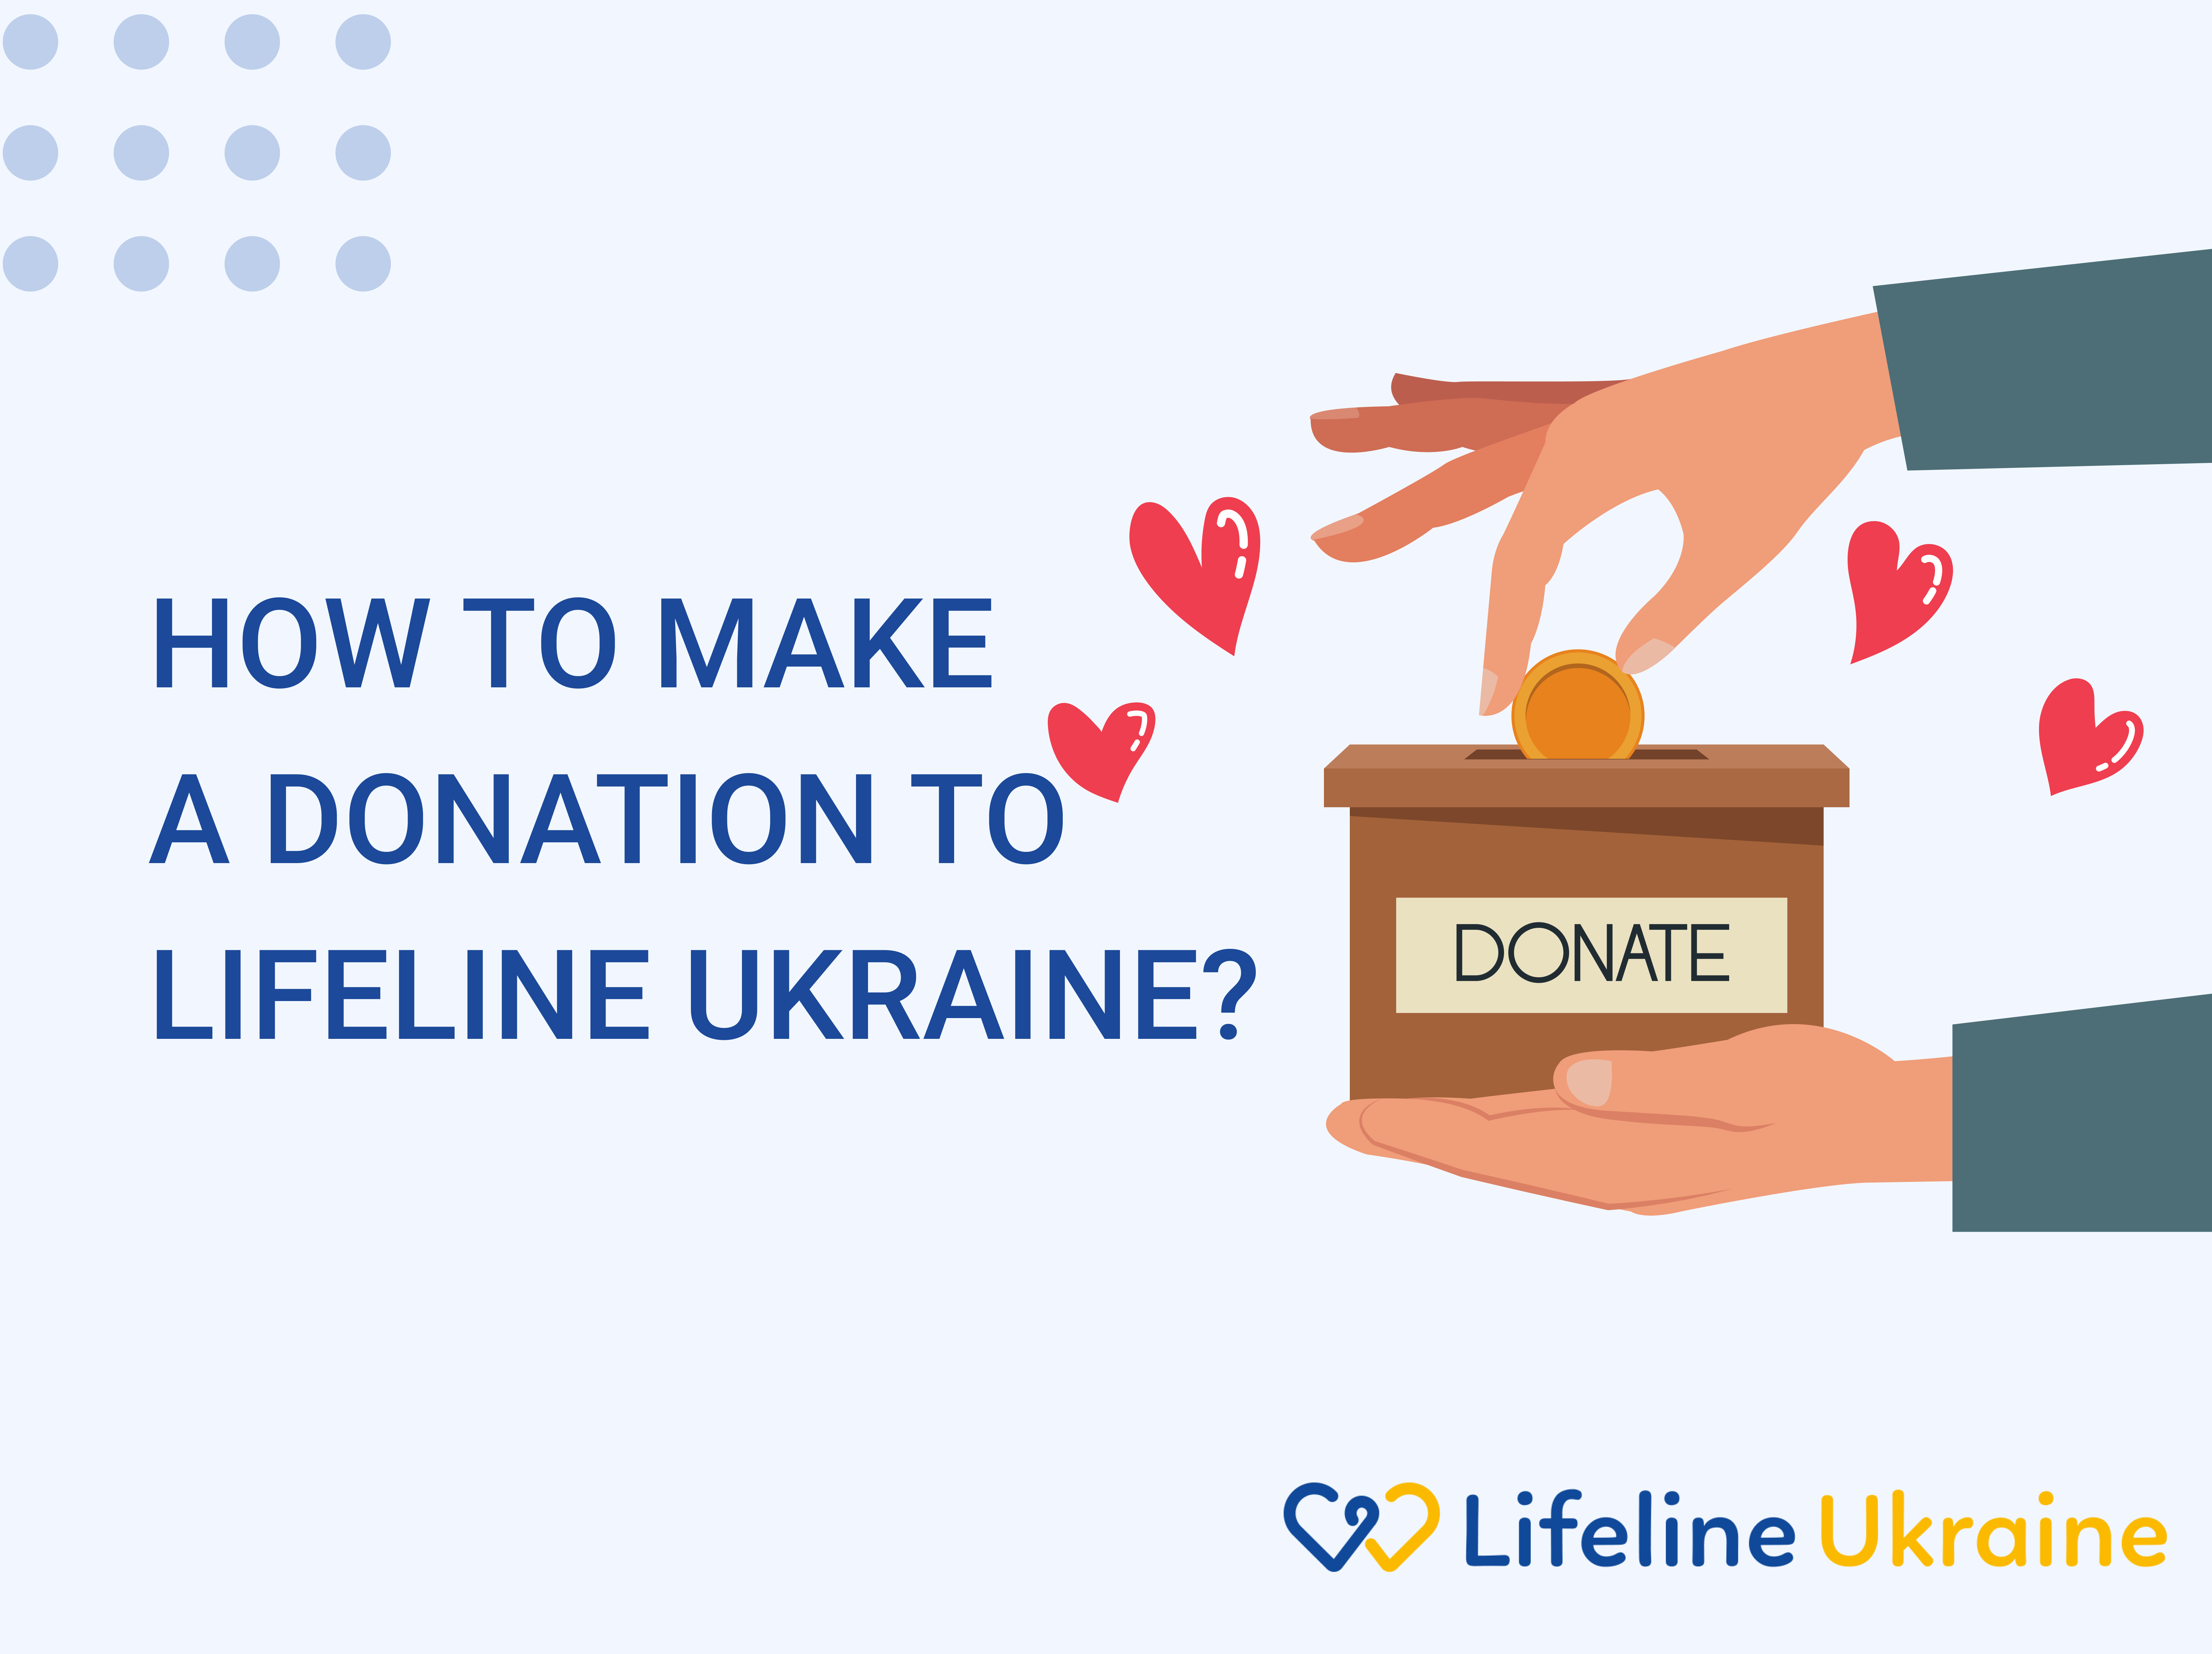 A hand puts a coin in a box for donations to Lifeline Ukraine